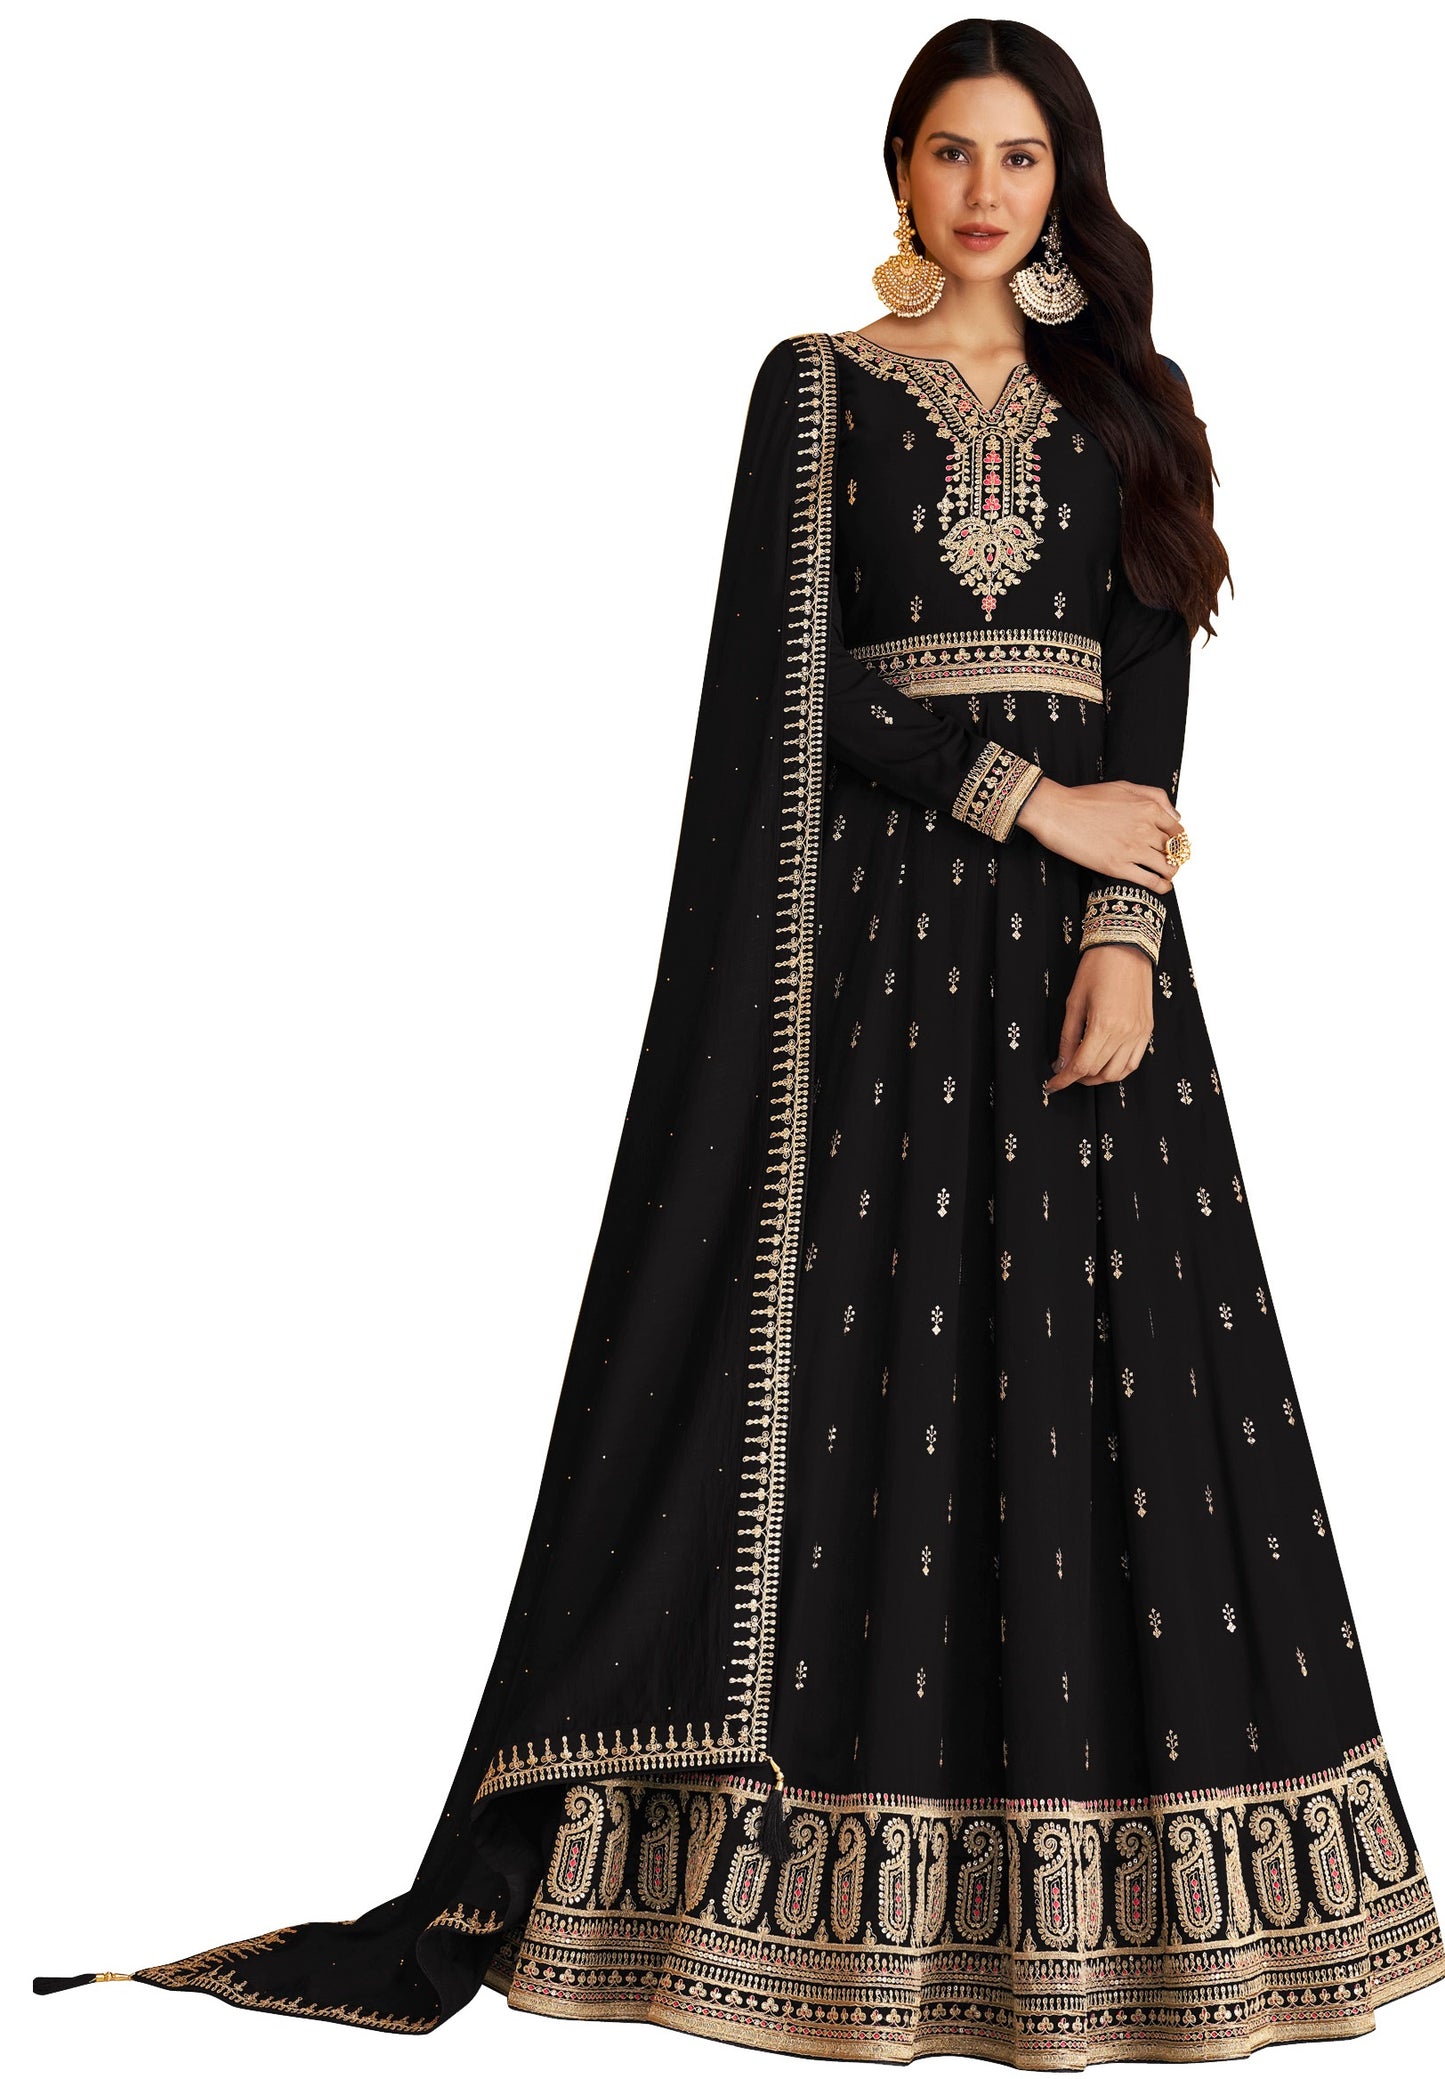 Black color Faux Georgette With Embroidery Work Long Anarkali Salwar Suit